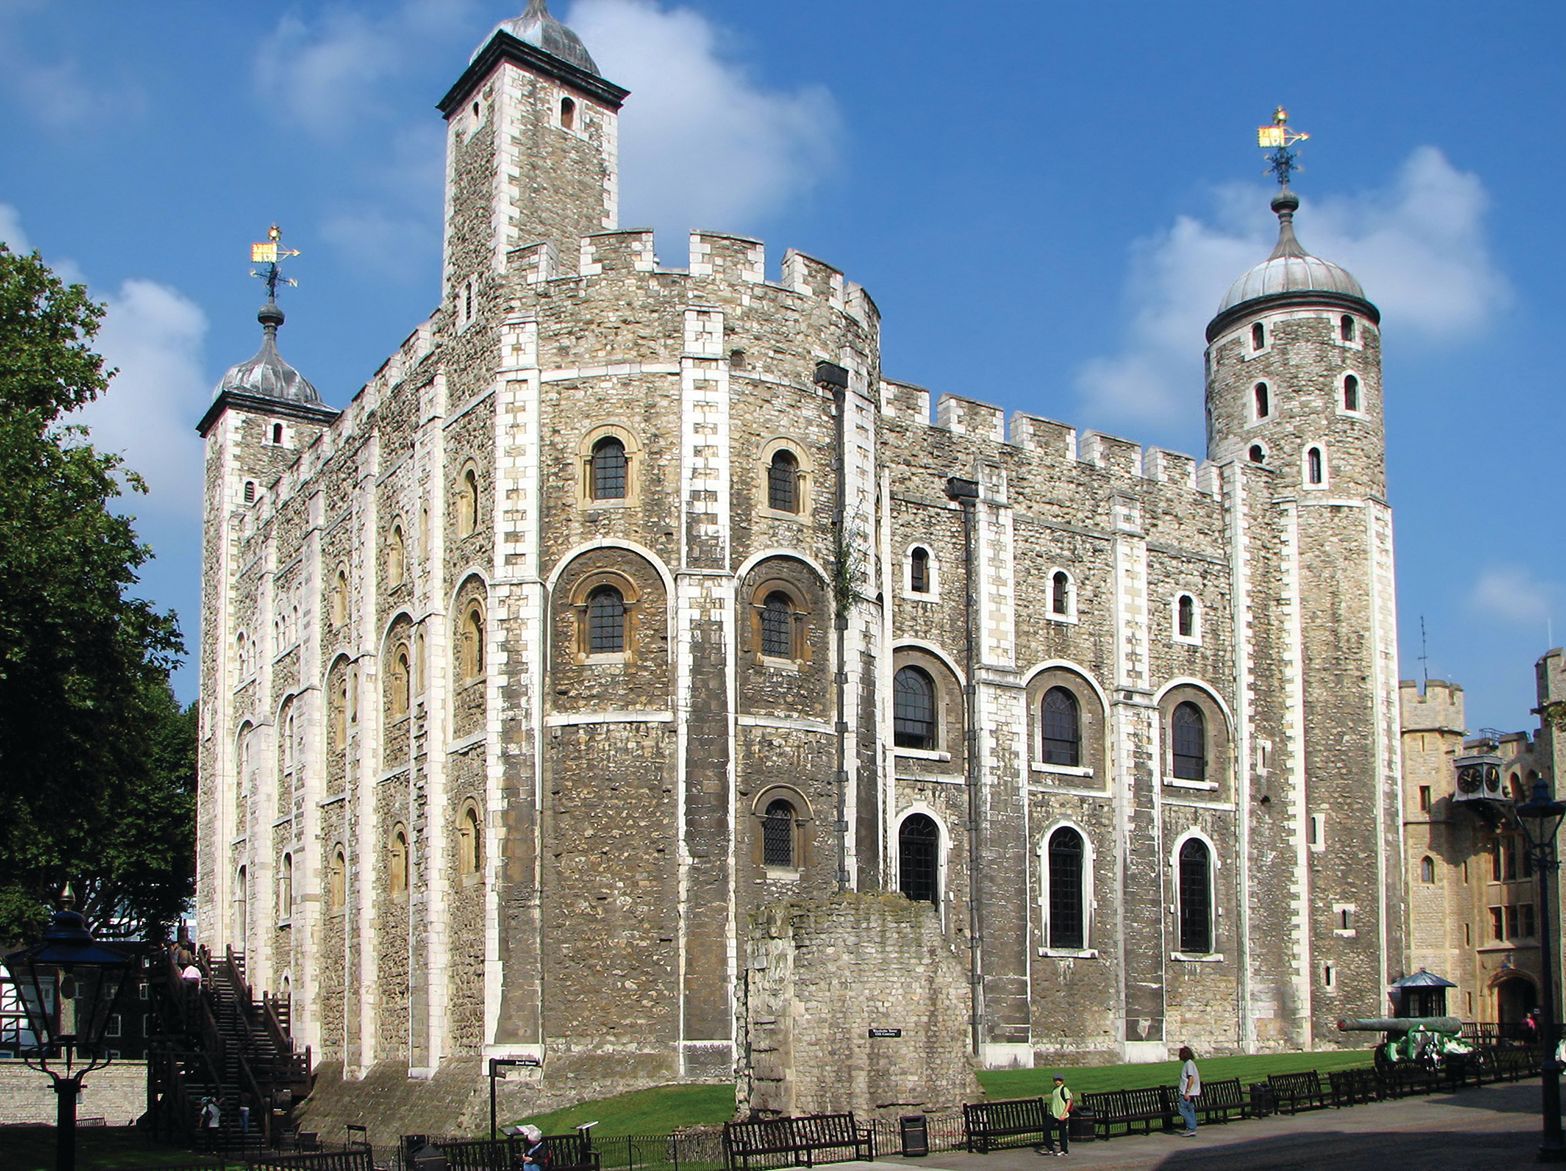 Built by William the Conqueror in 1078, the White Tower the is part of a large complex of buildings known as the Tower of London, officially “His Majesty's Royal Palace and Fortress of the Tower of London.”